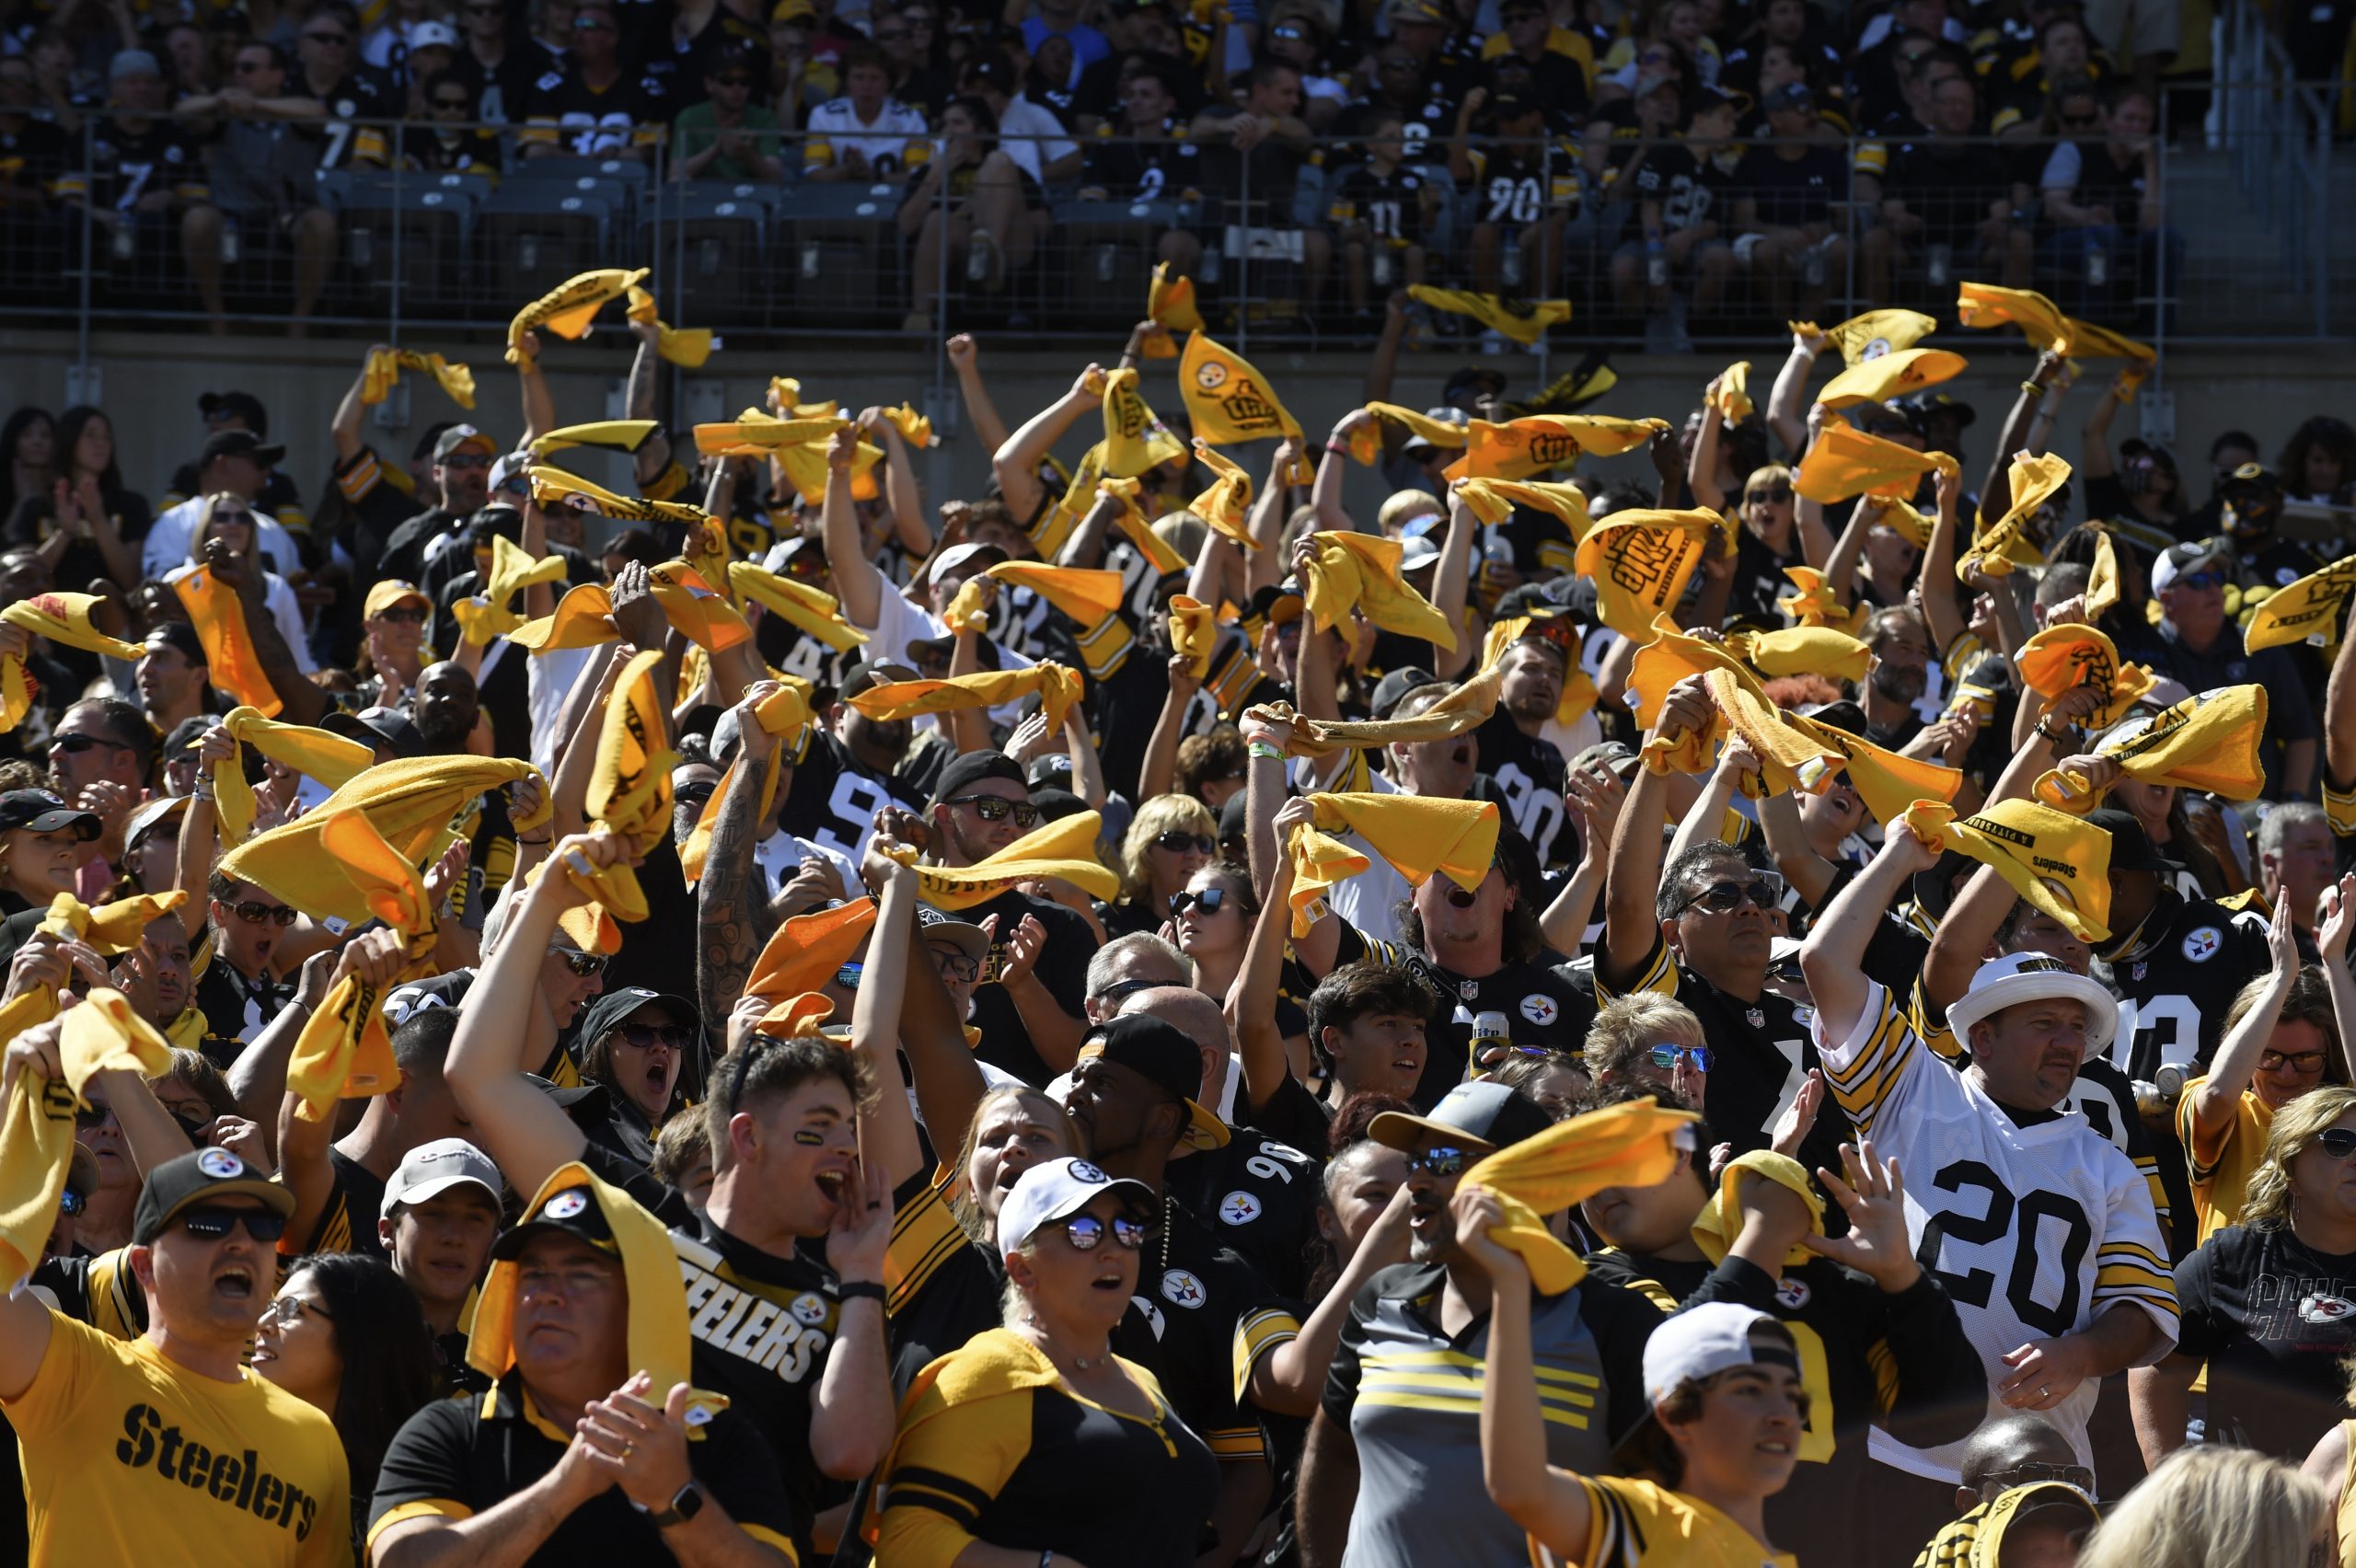 Fans during a regular season game between the Pittsburgh Steelers and the Las Vegas Raiders, Sunday, Sept. 19, 2021 in Pittsburgh, PA. (Arron Anastasia / Pittsburgh Steelers)